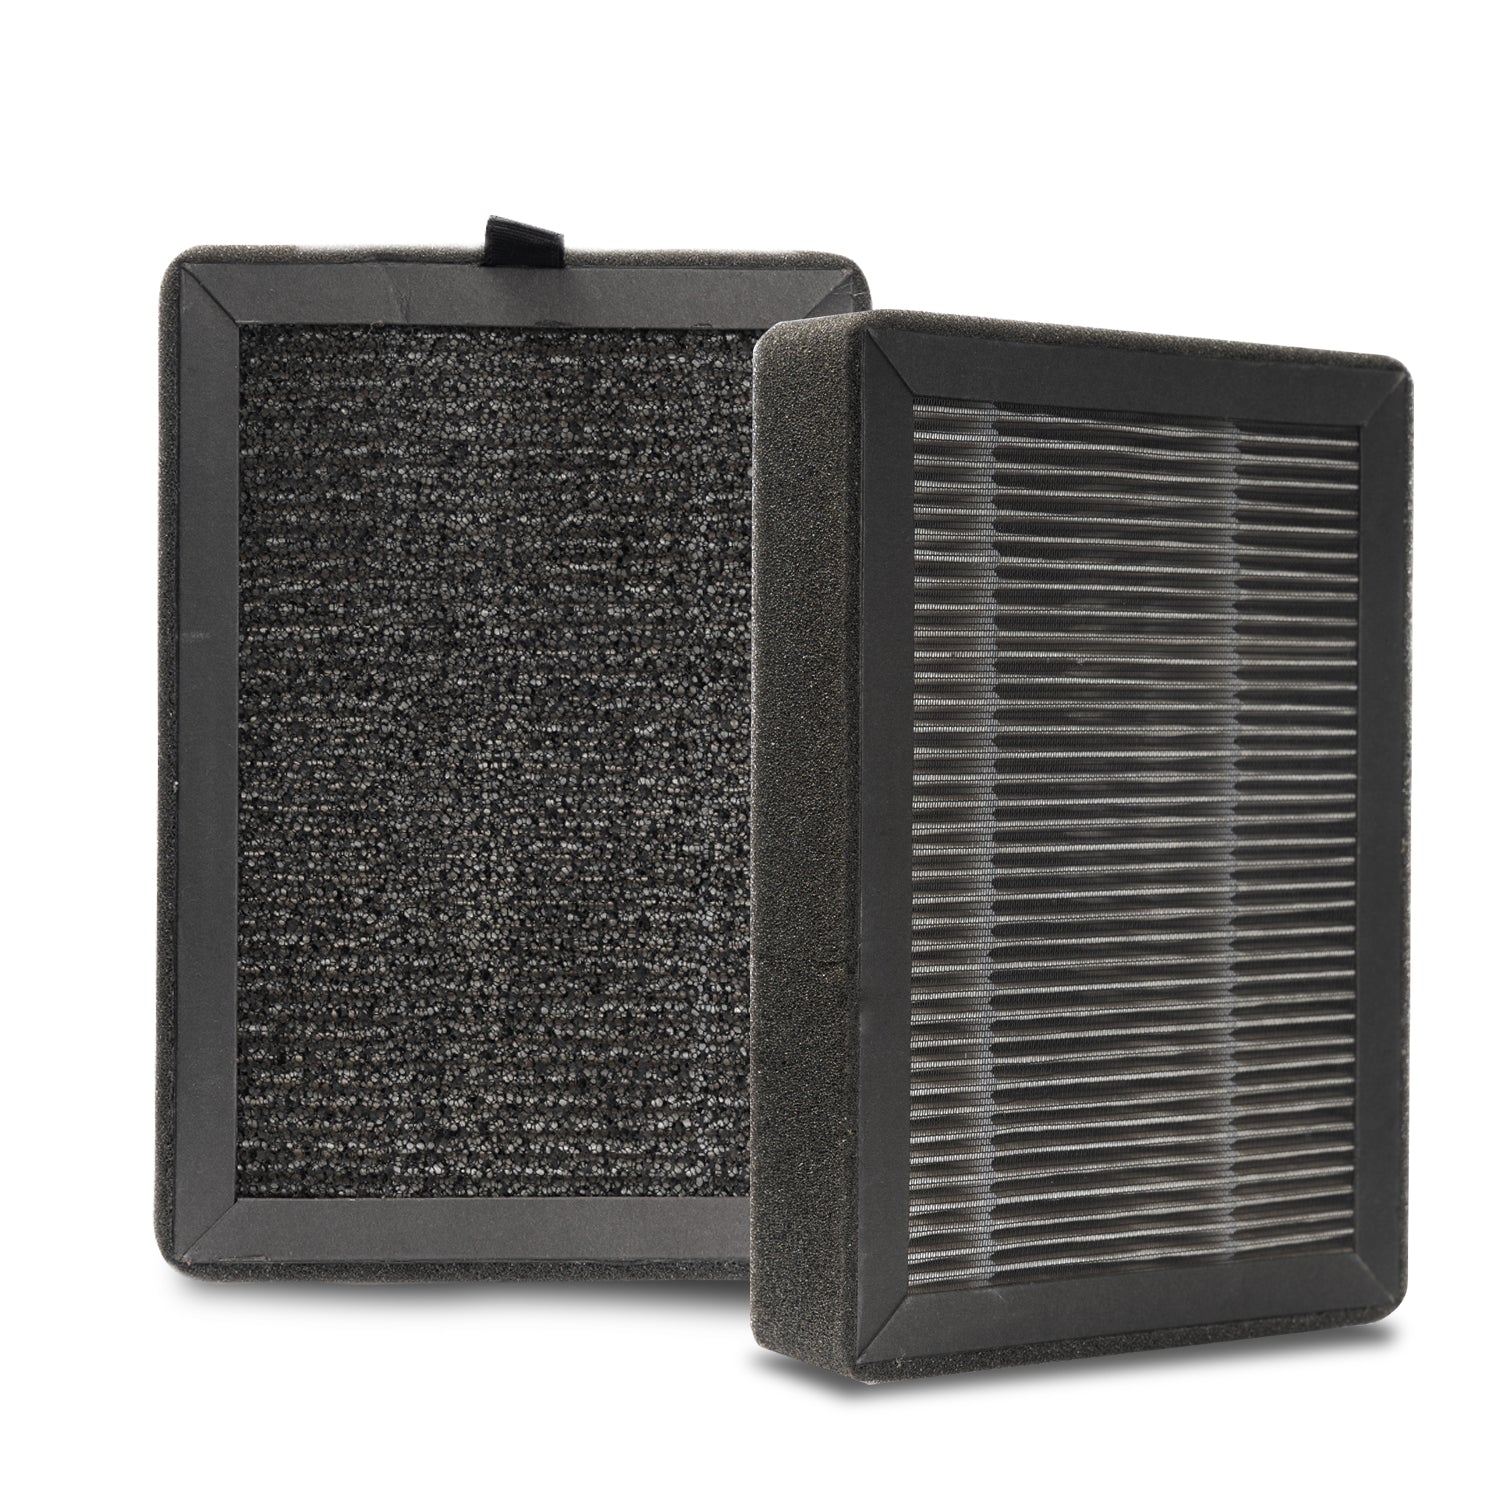 ROVACS Air Purifier RV60 Filter (2 pcs), High efficiency H13 particulate air filter and activated carbon sponge, captures 99.97% of particles with a diameter greater than or equal to 0.3 microns, lasts 3000 hours